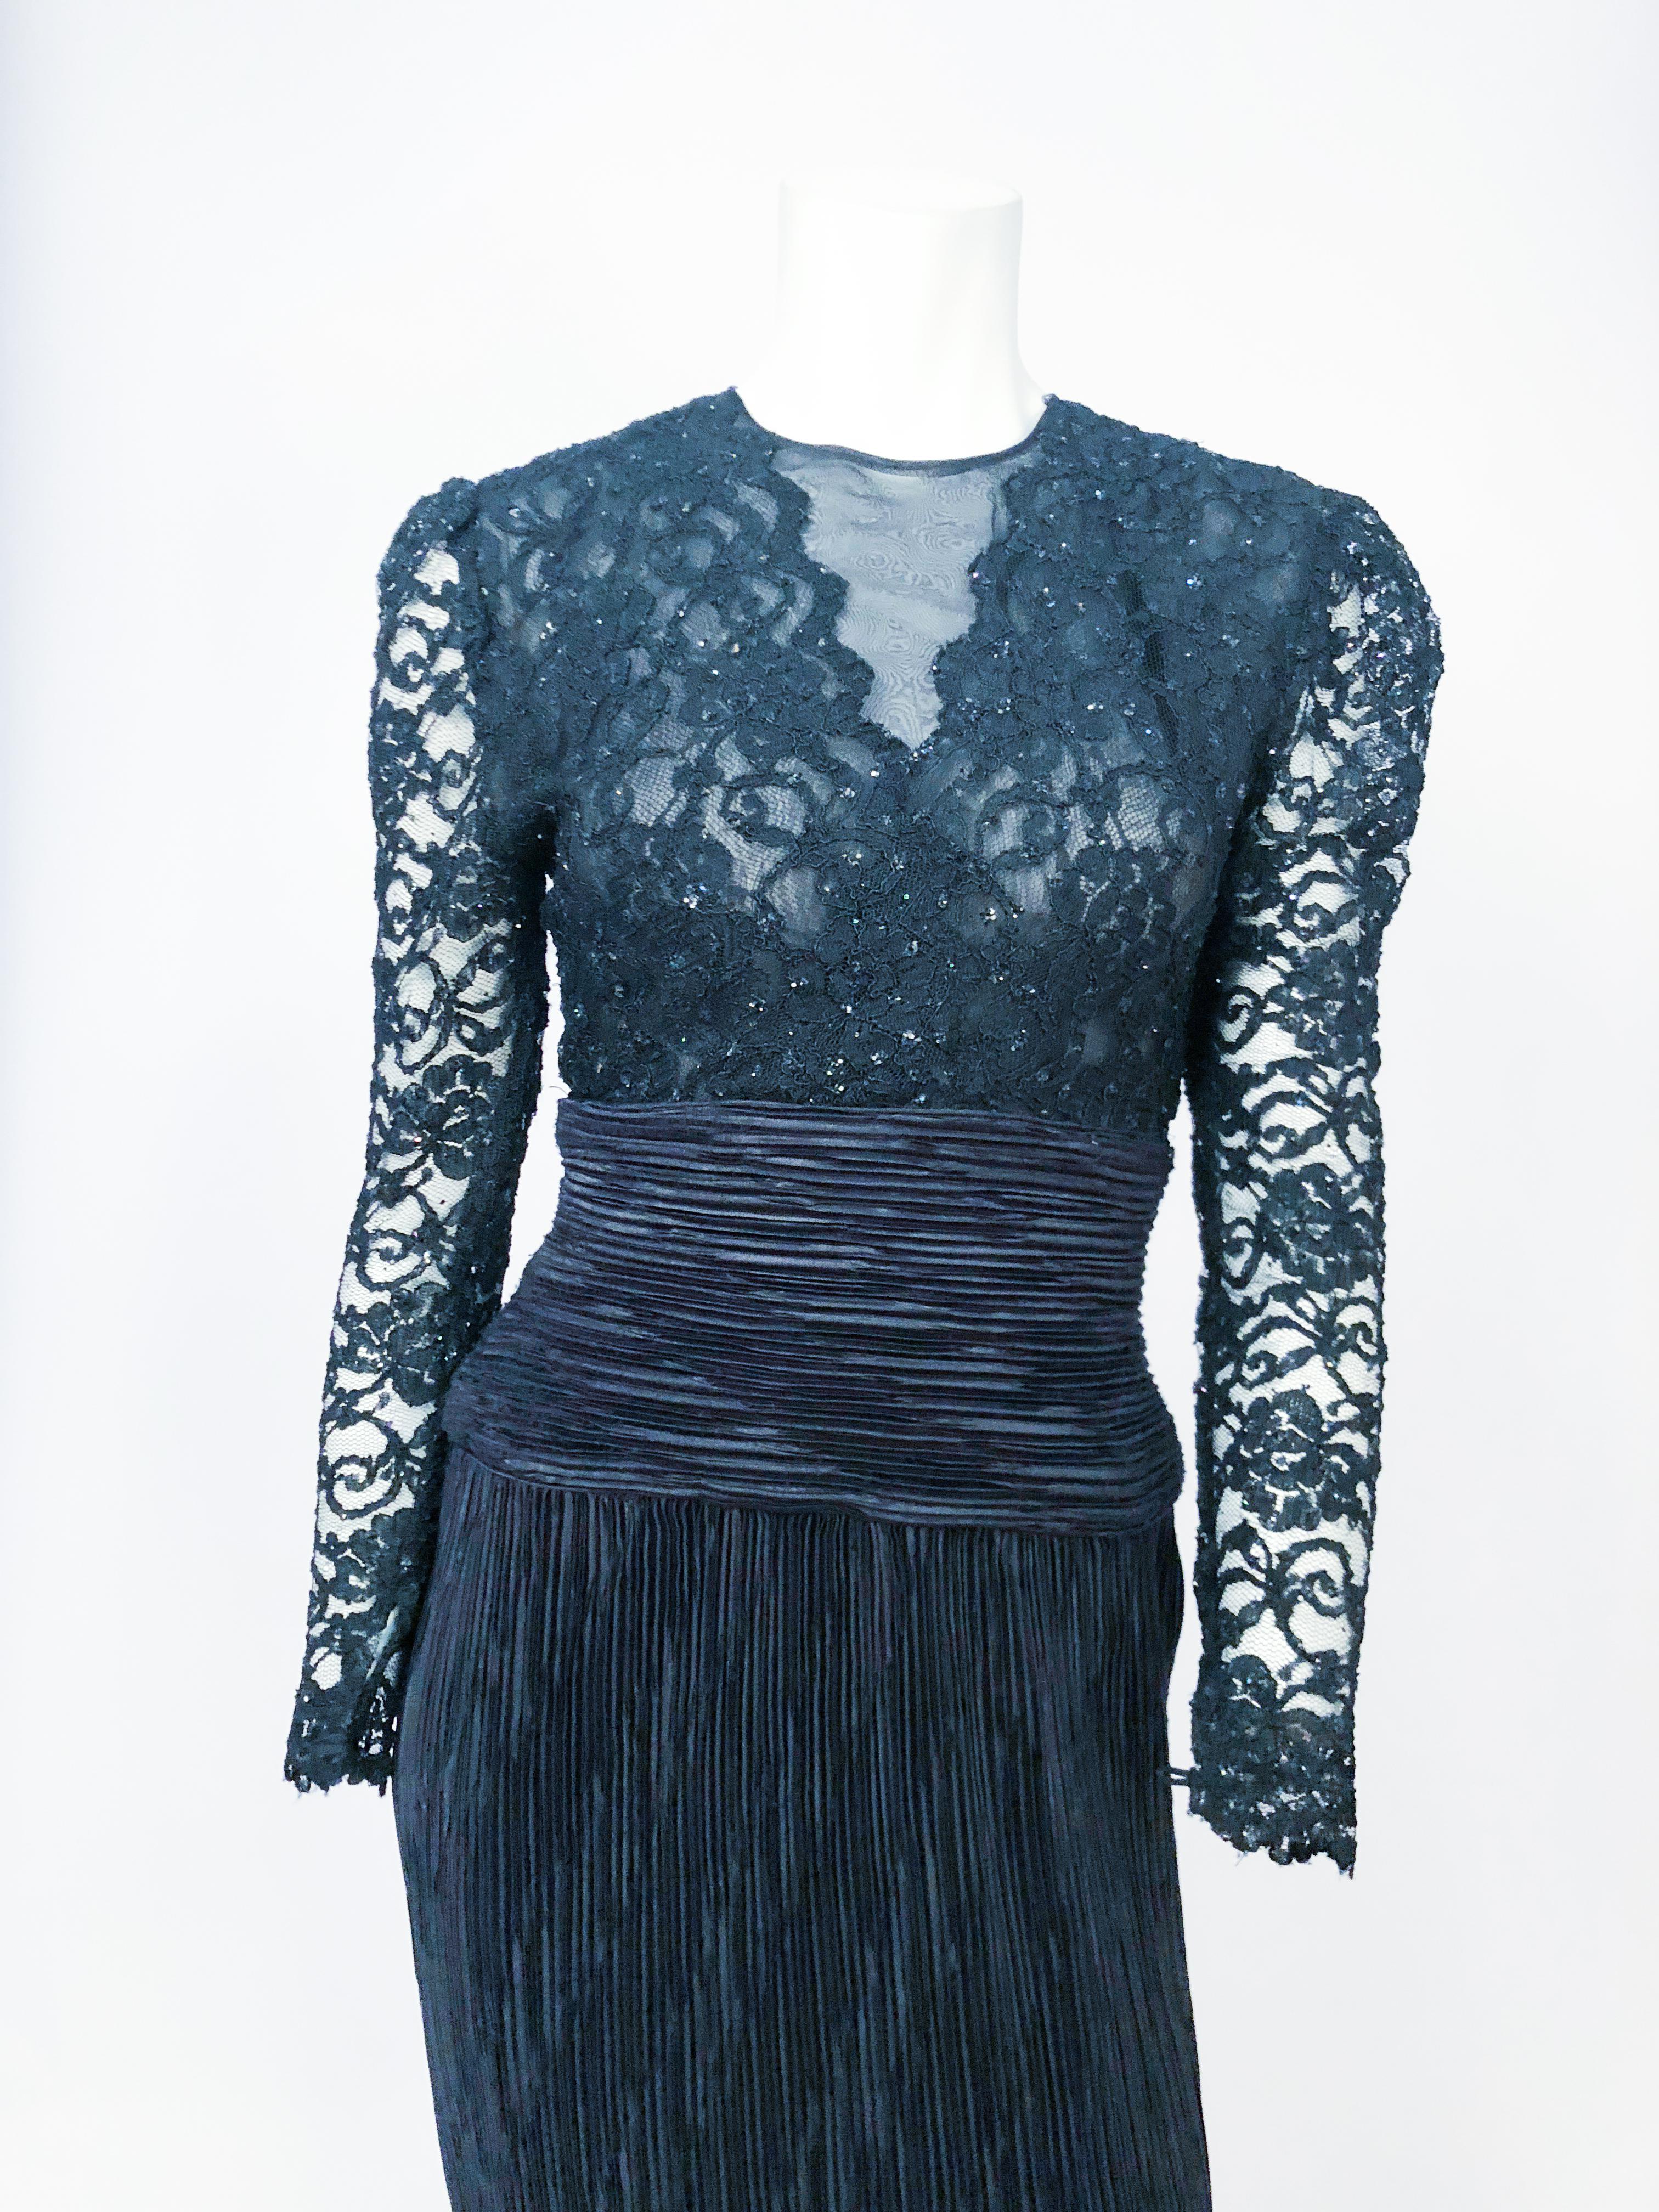 1980s Black Lace and Origami Pleated Dress. Also has glitter sequin in the lace. 